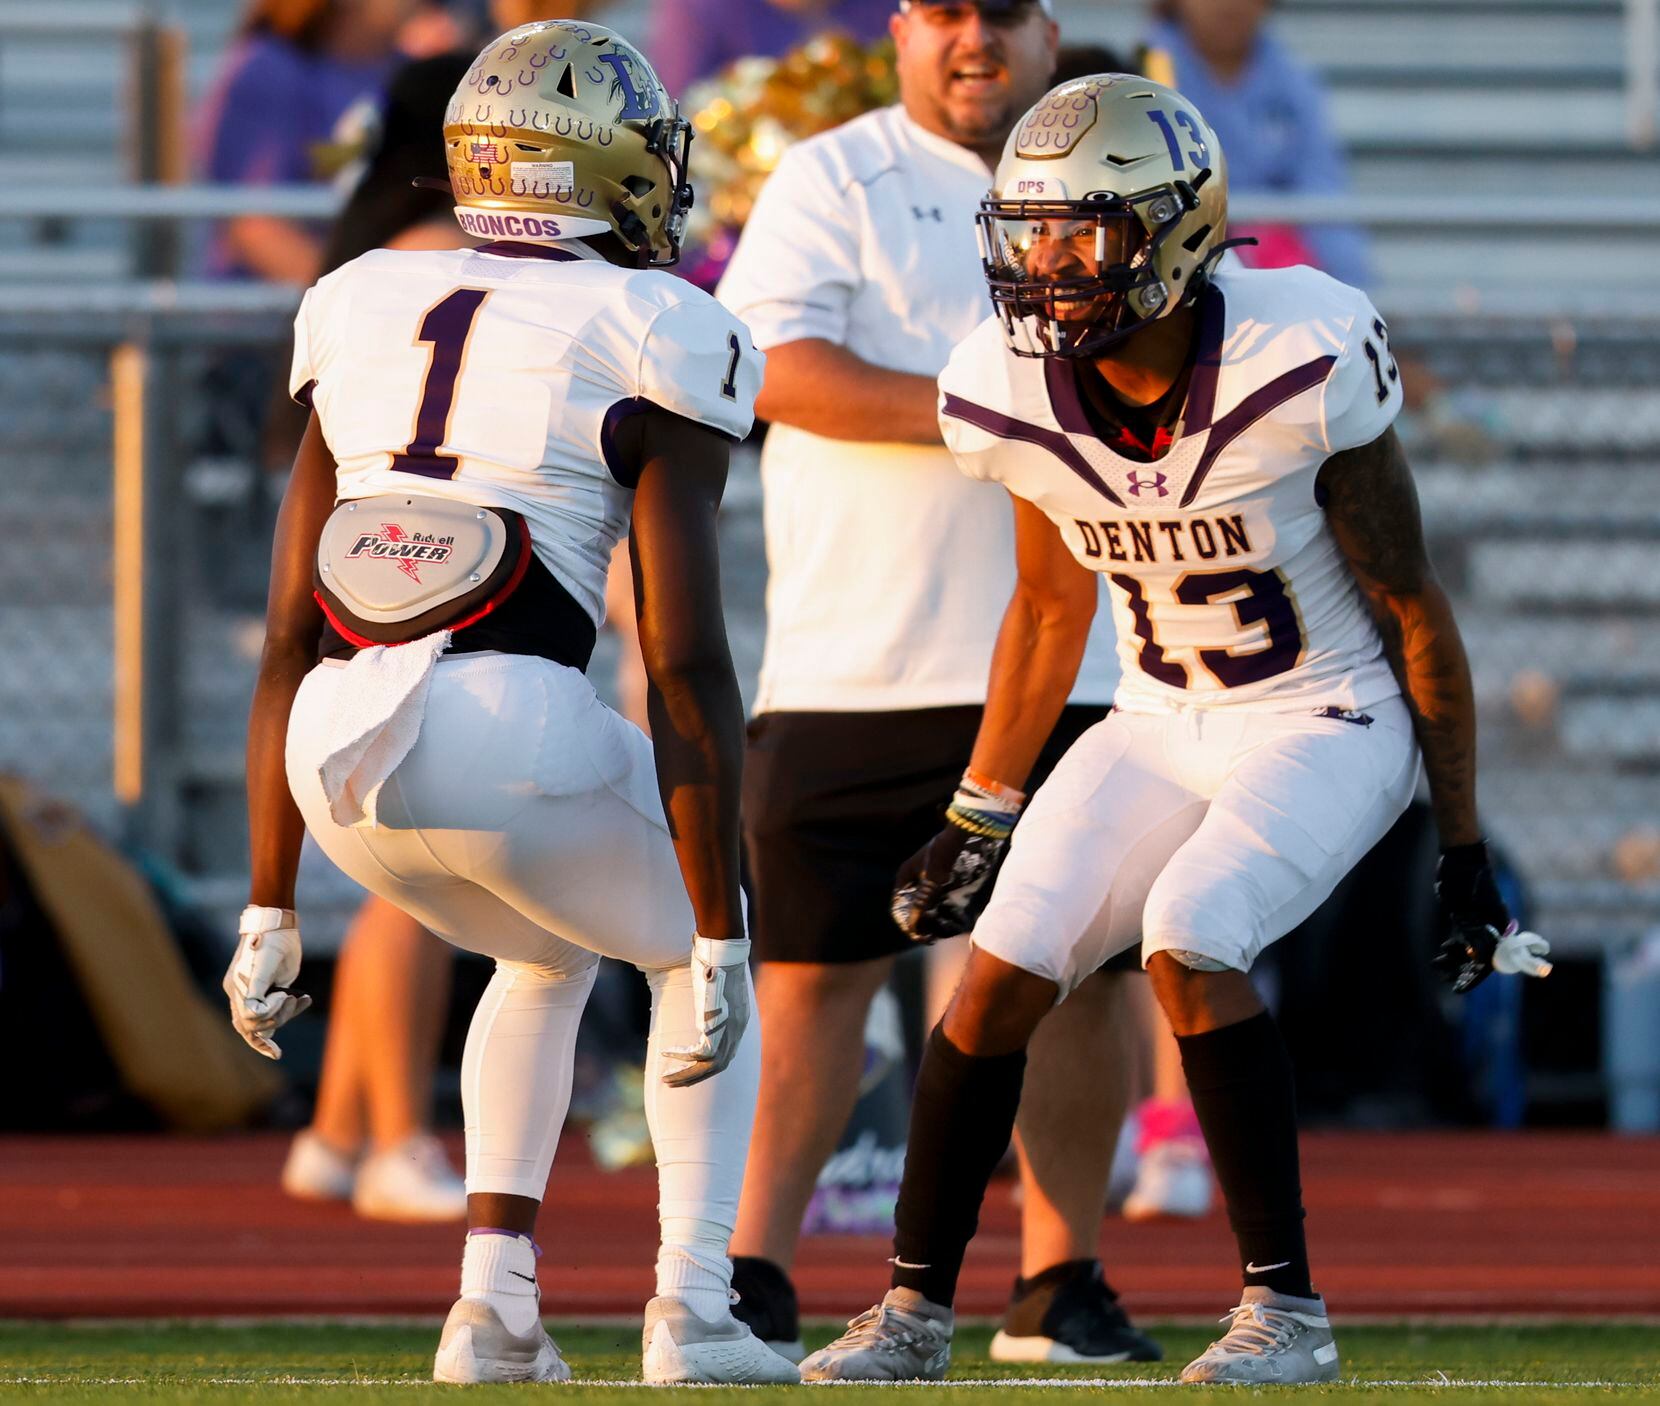 Denton’s running back Coco Brown (1) celebrates with teammate strong safety Jason Smith (13)...